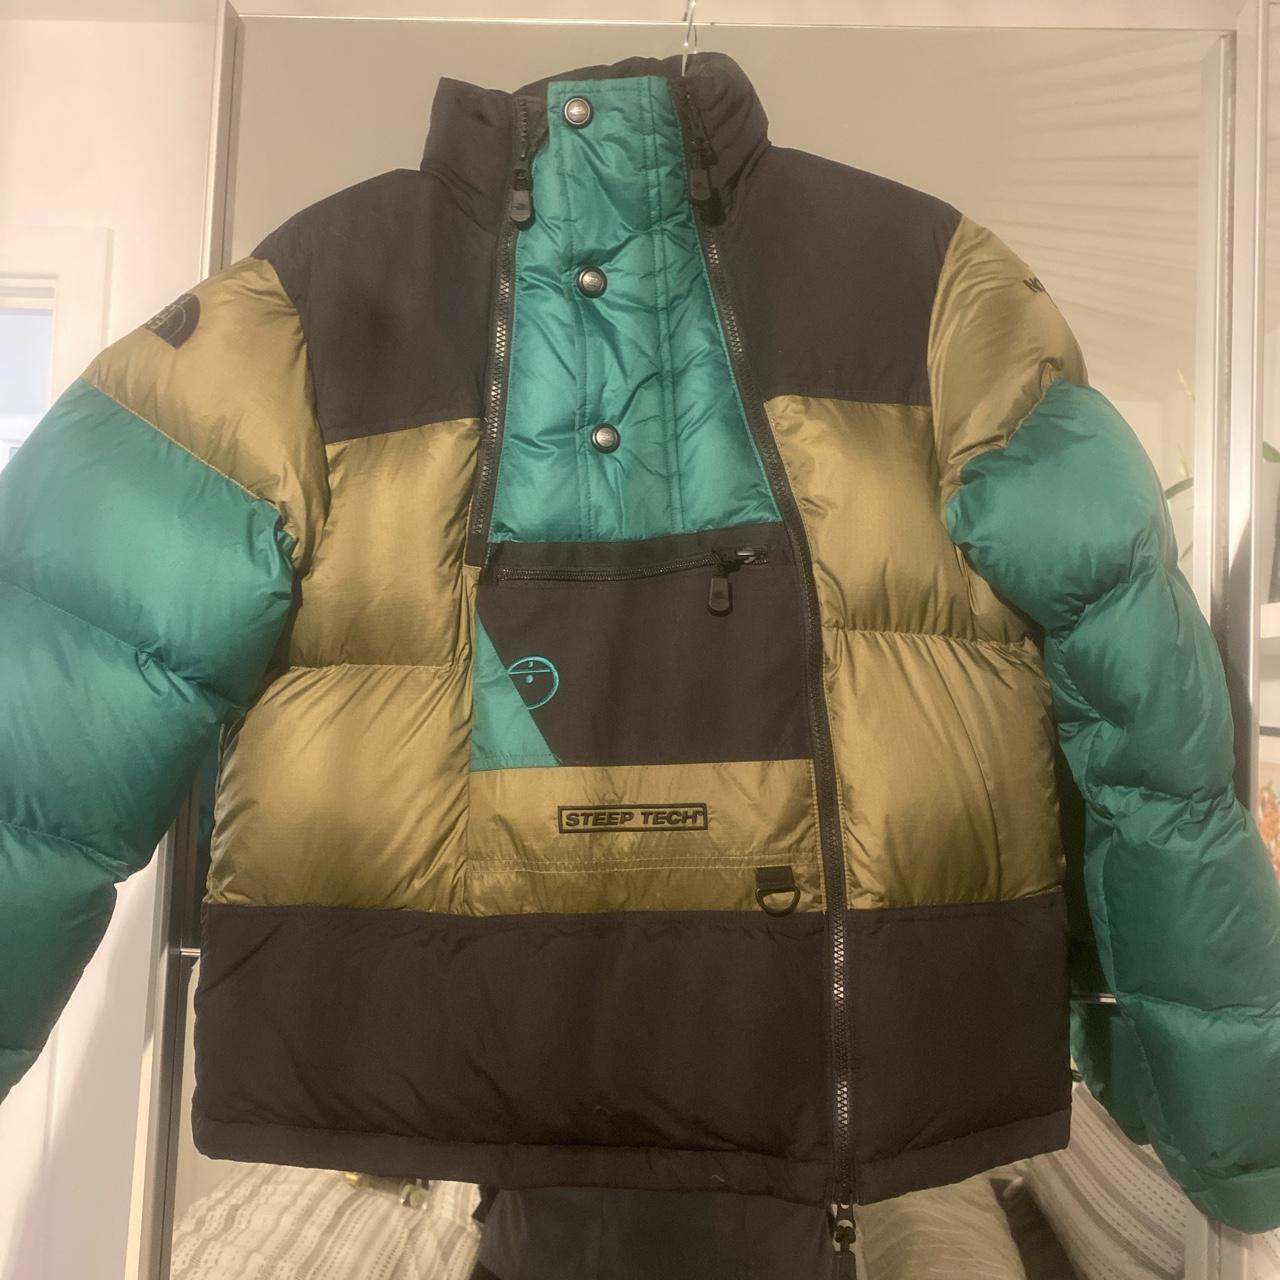 Supreme x The North Face steep tech jacket. White - Depop